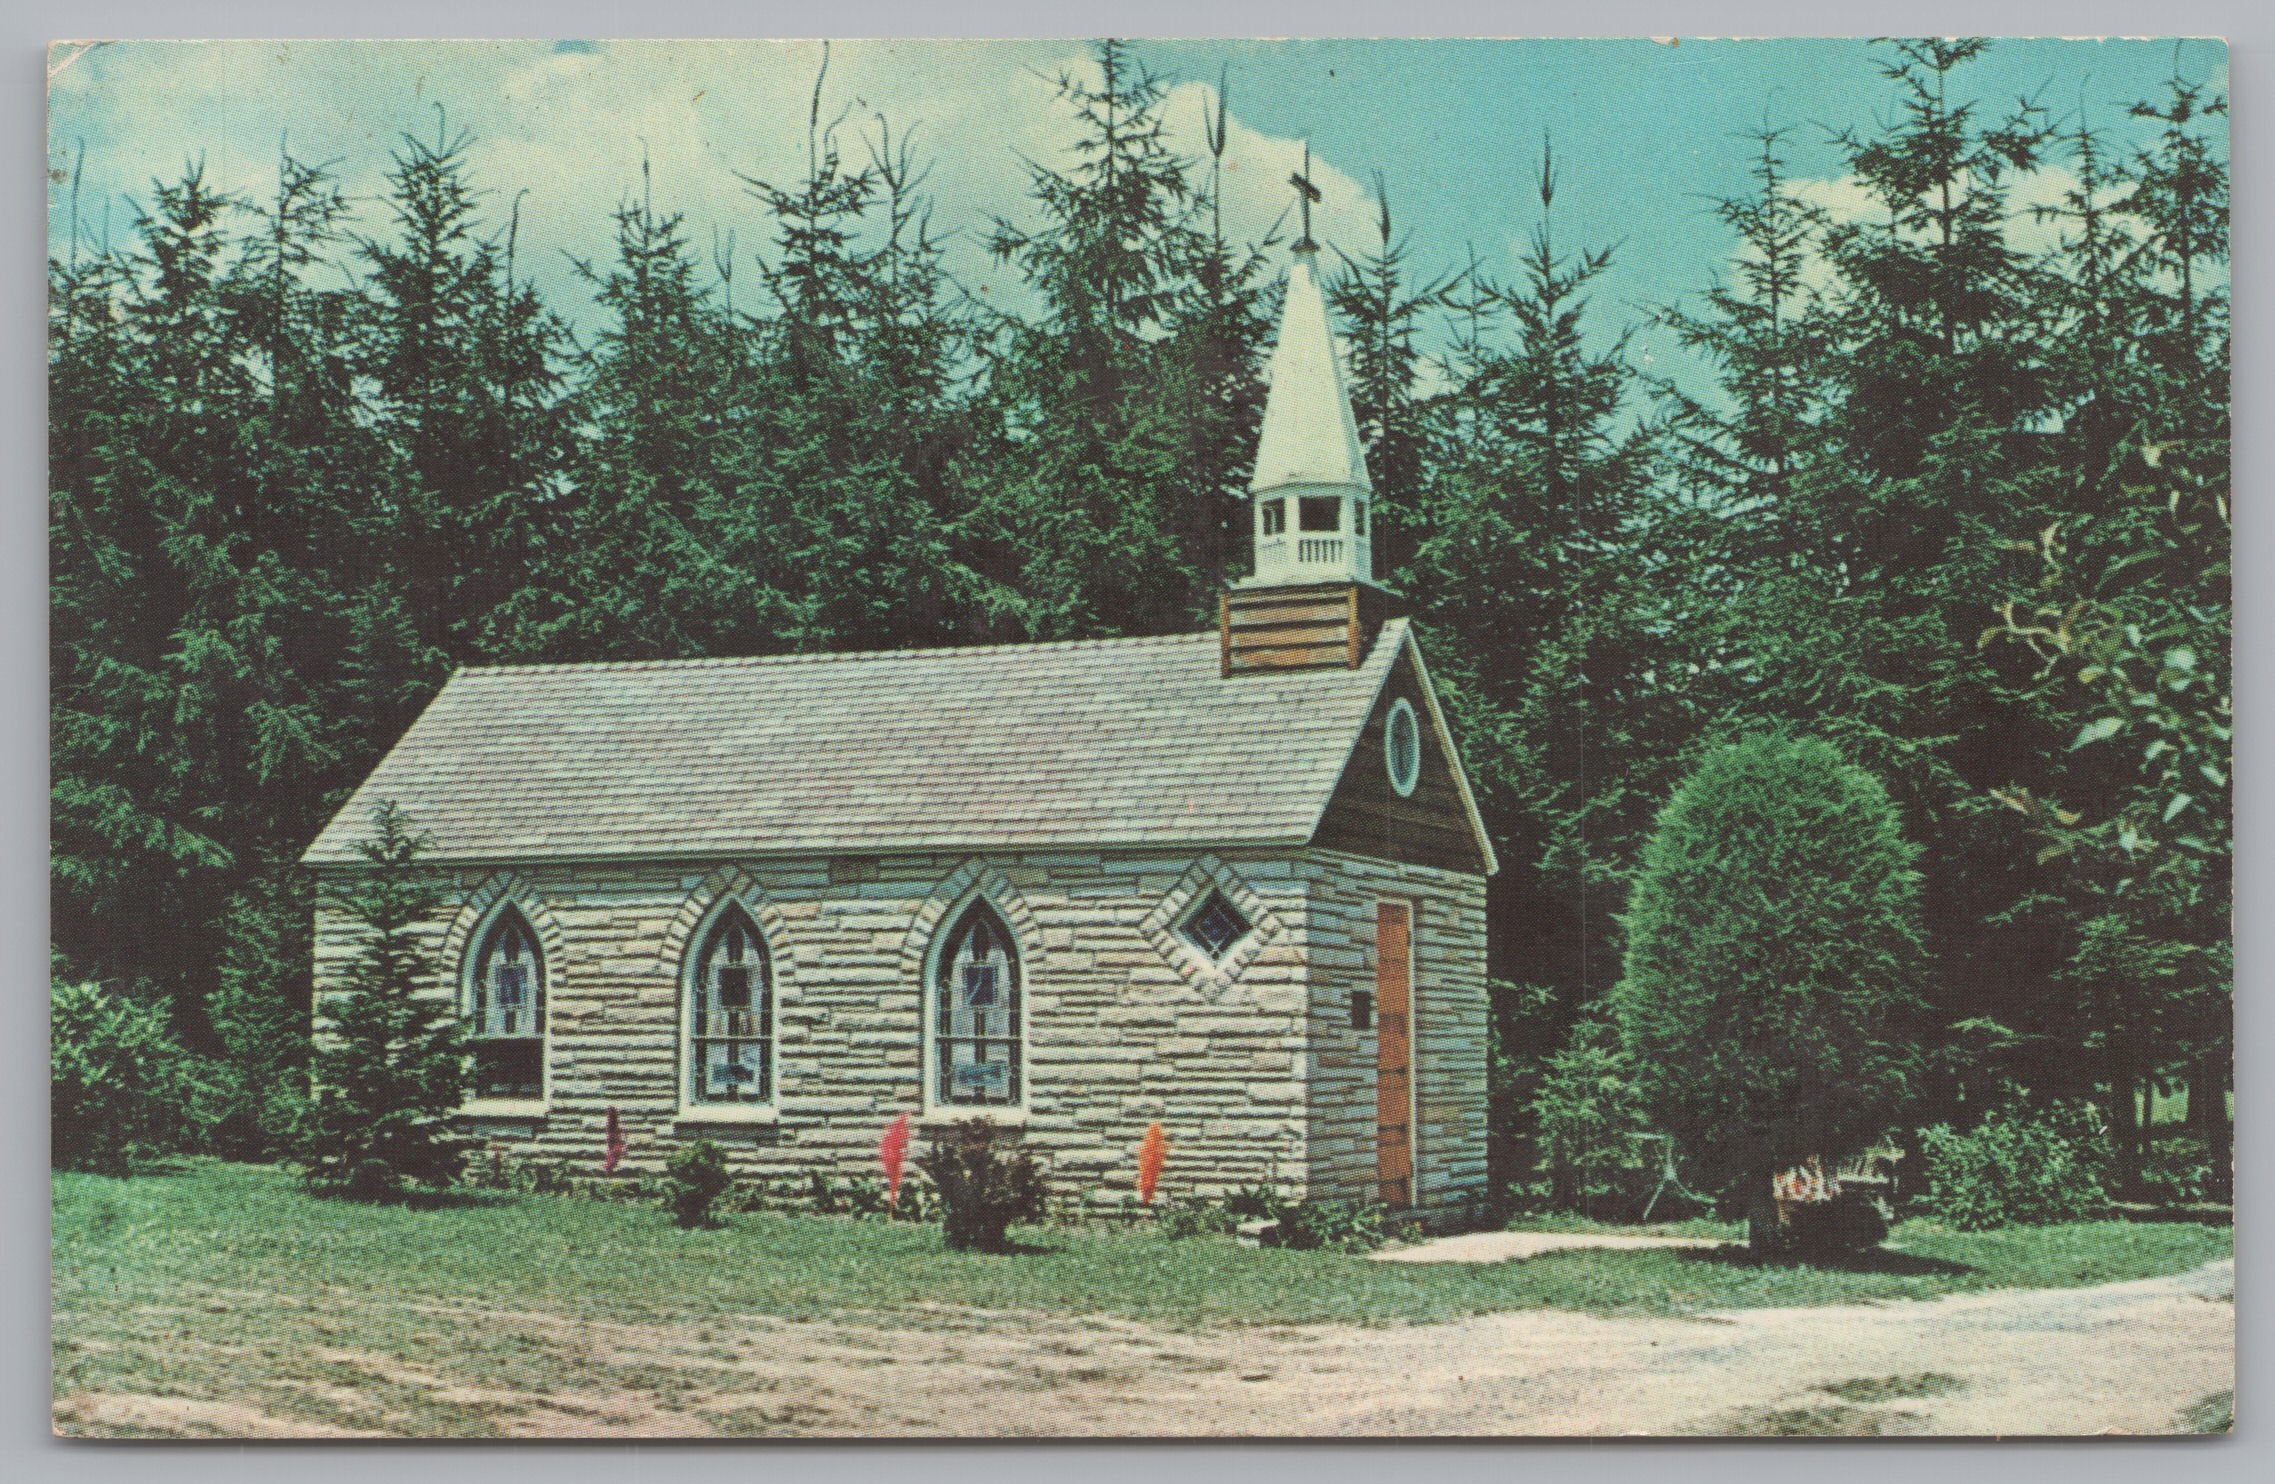 Our Lady Of The Pines, Route 219, Horse Shoe Run, West Virginia, Vintage Post Card.